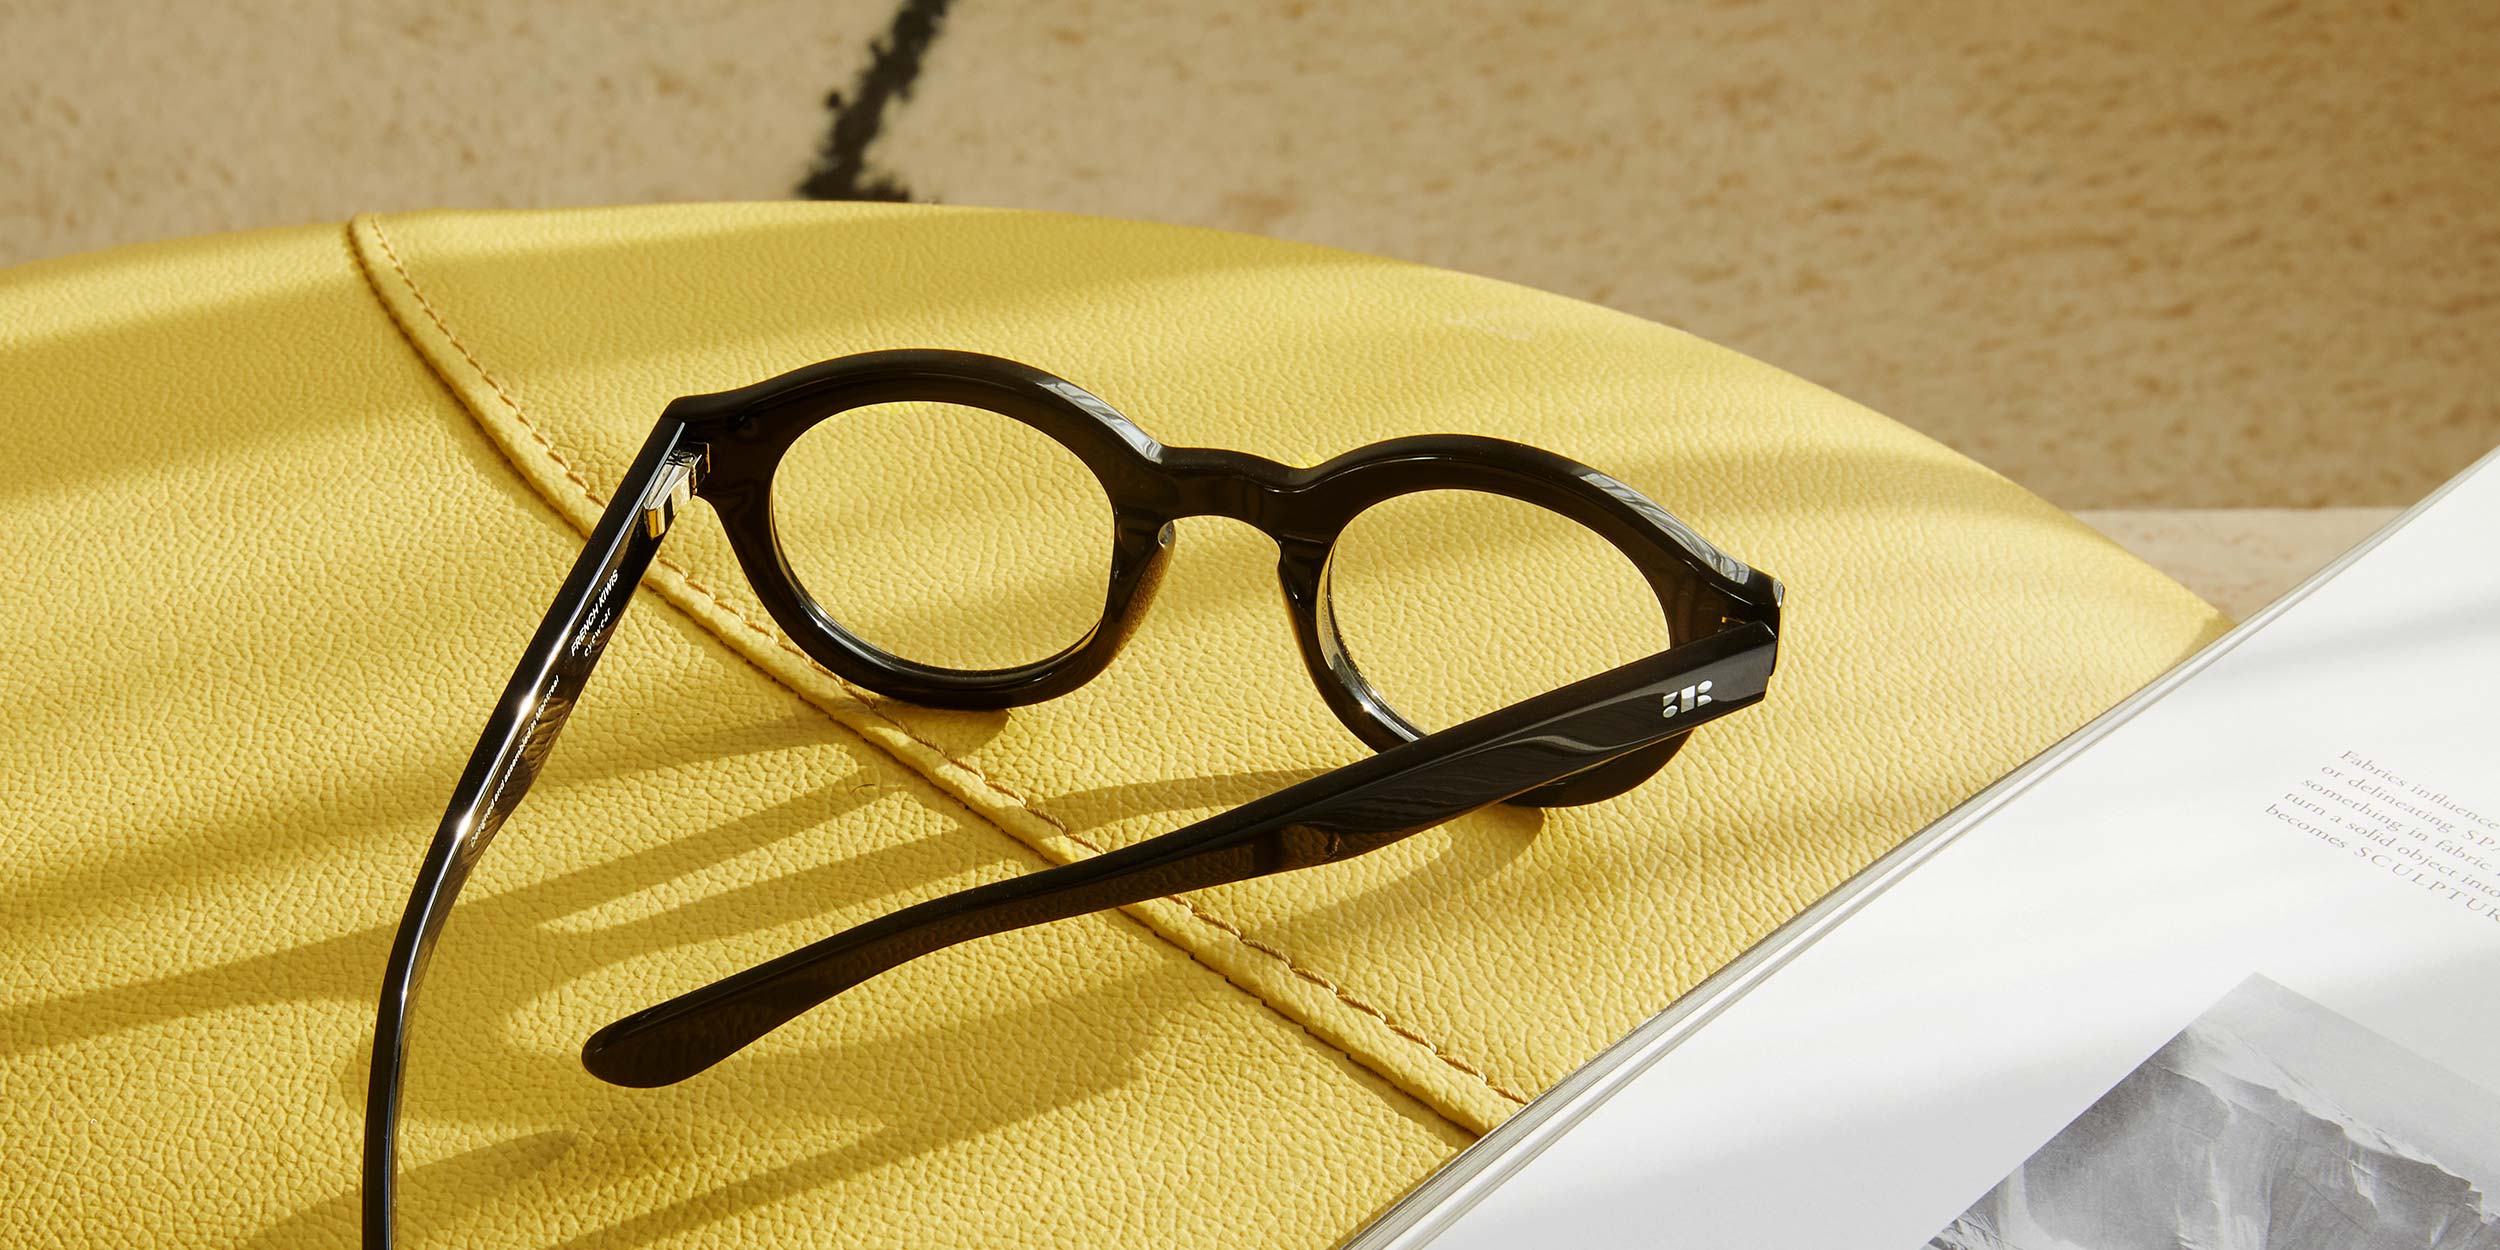 Photo Details of Eden Clear Reading Glasses in a room